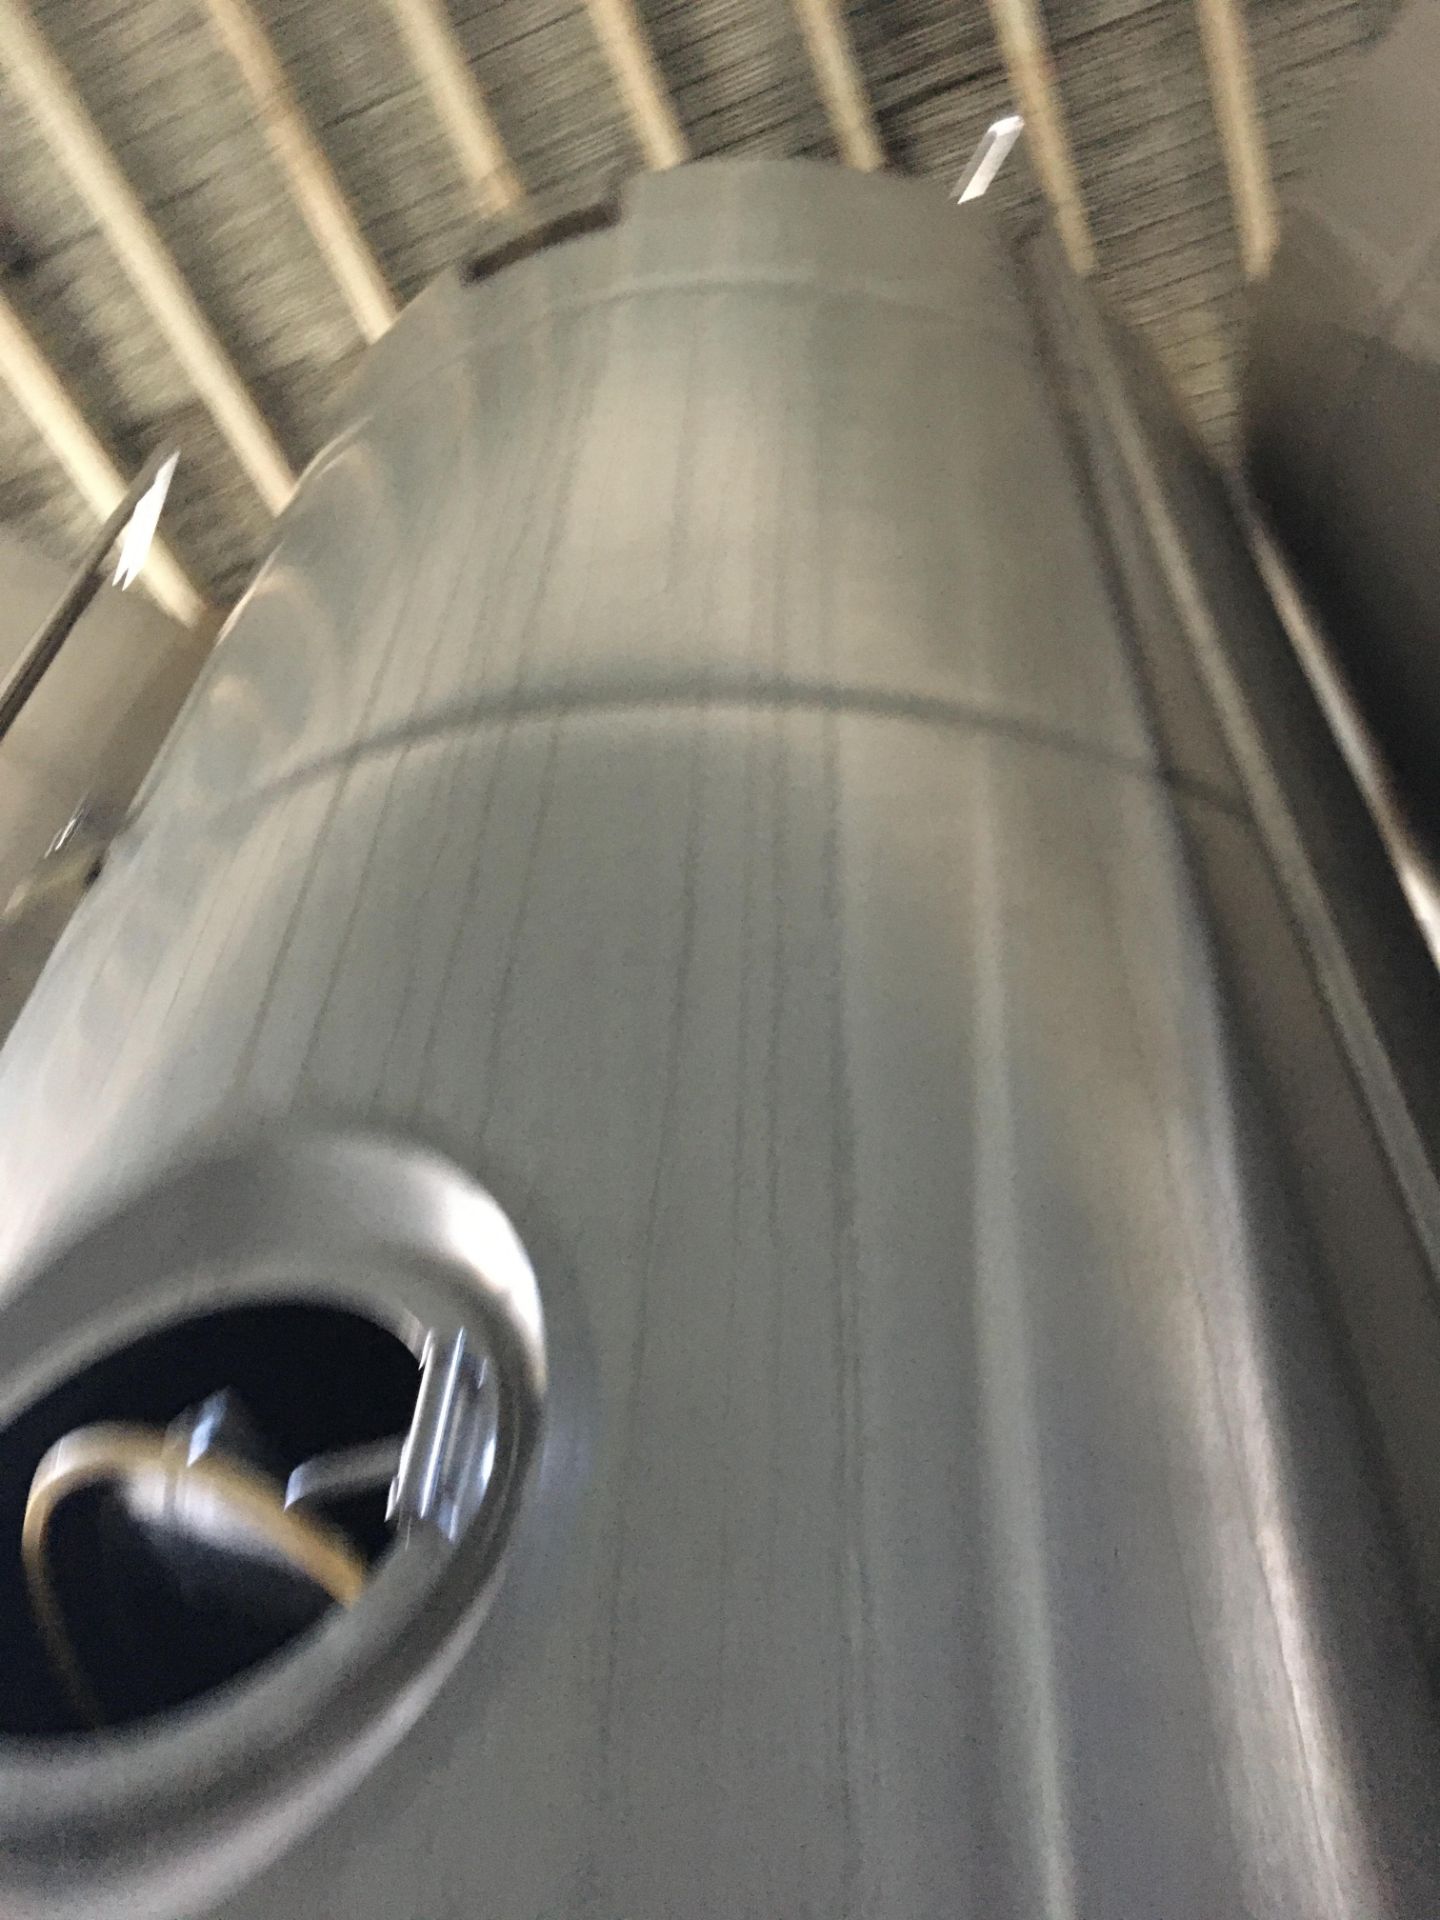 80-BBL Minnetonka Fermentation Tank, Model 80-BBL, Year 2017, Stainless Steel; Vessel store wort and - Image 13 of 15